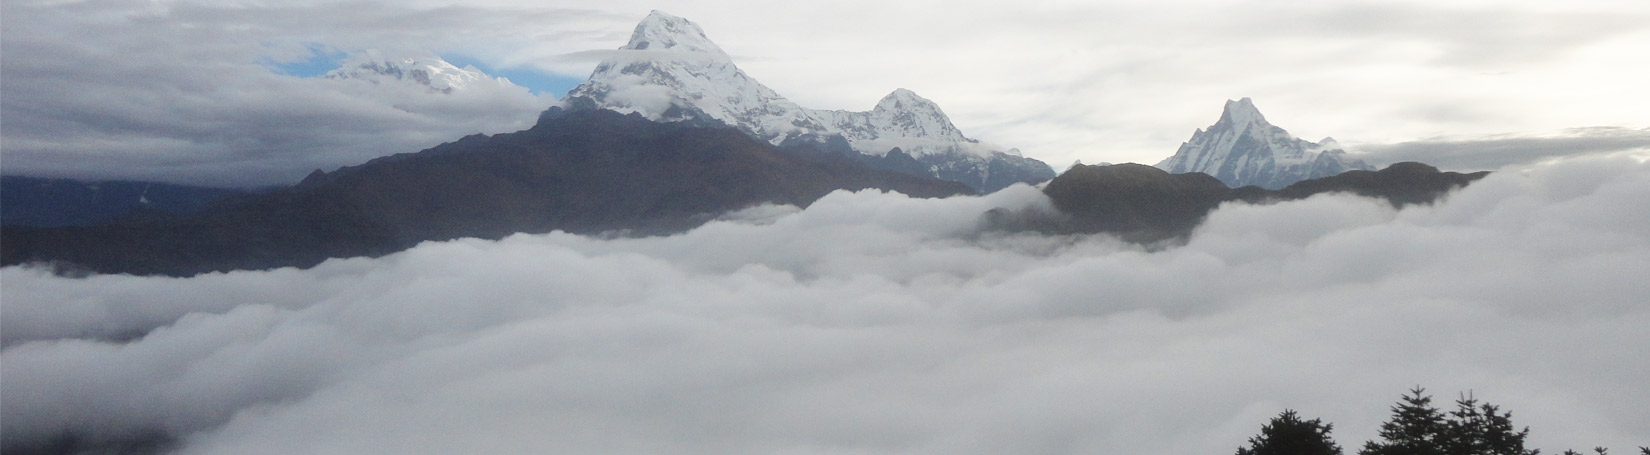 Annapurna South and Fishtail Himal